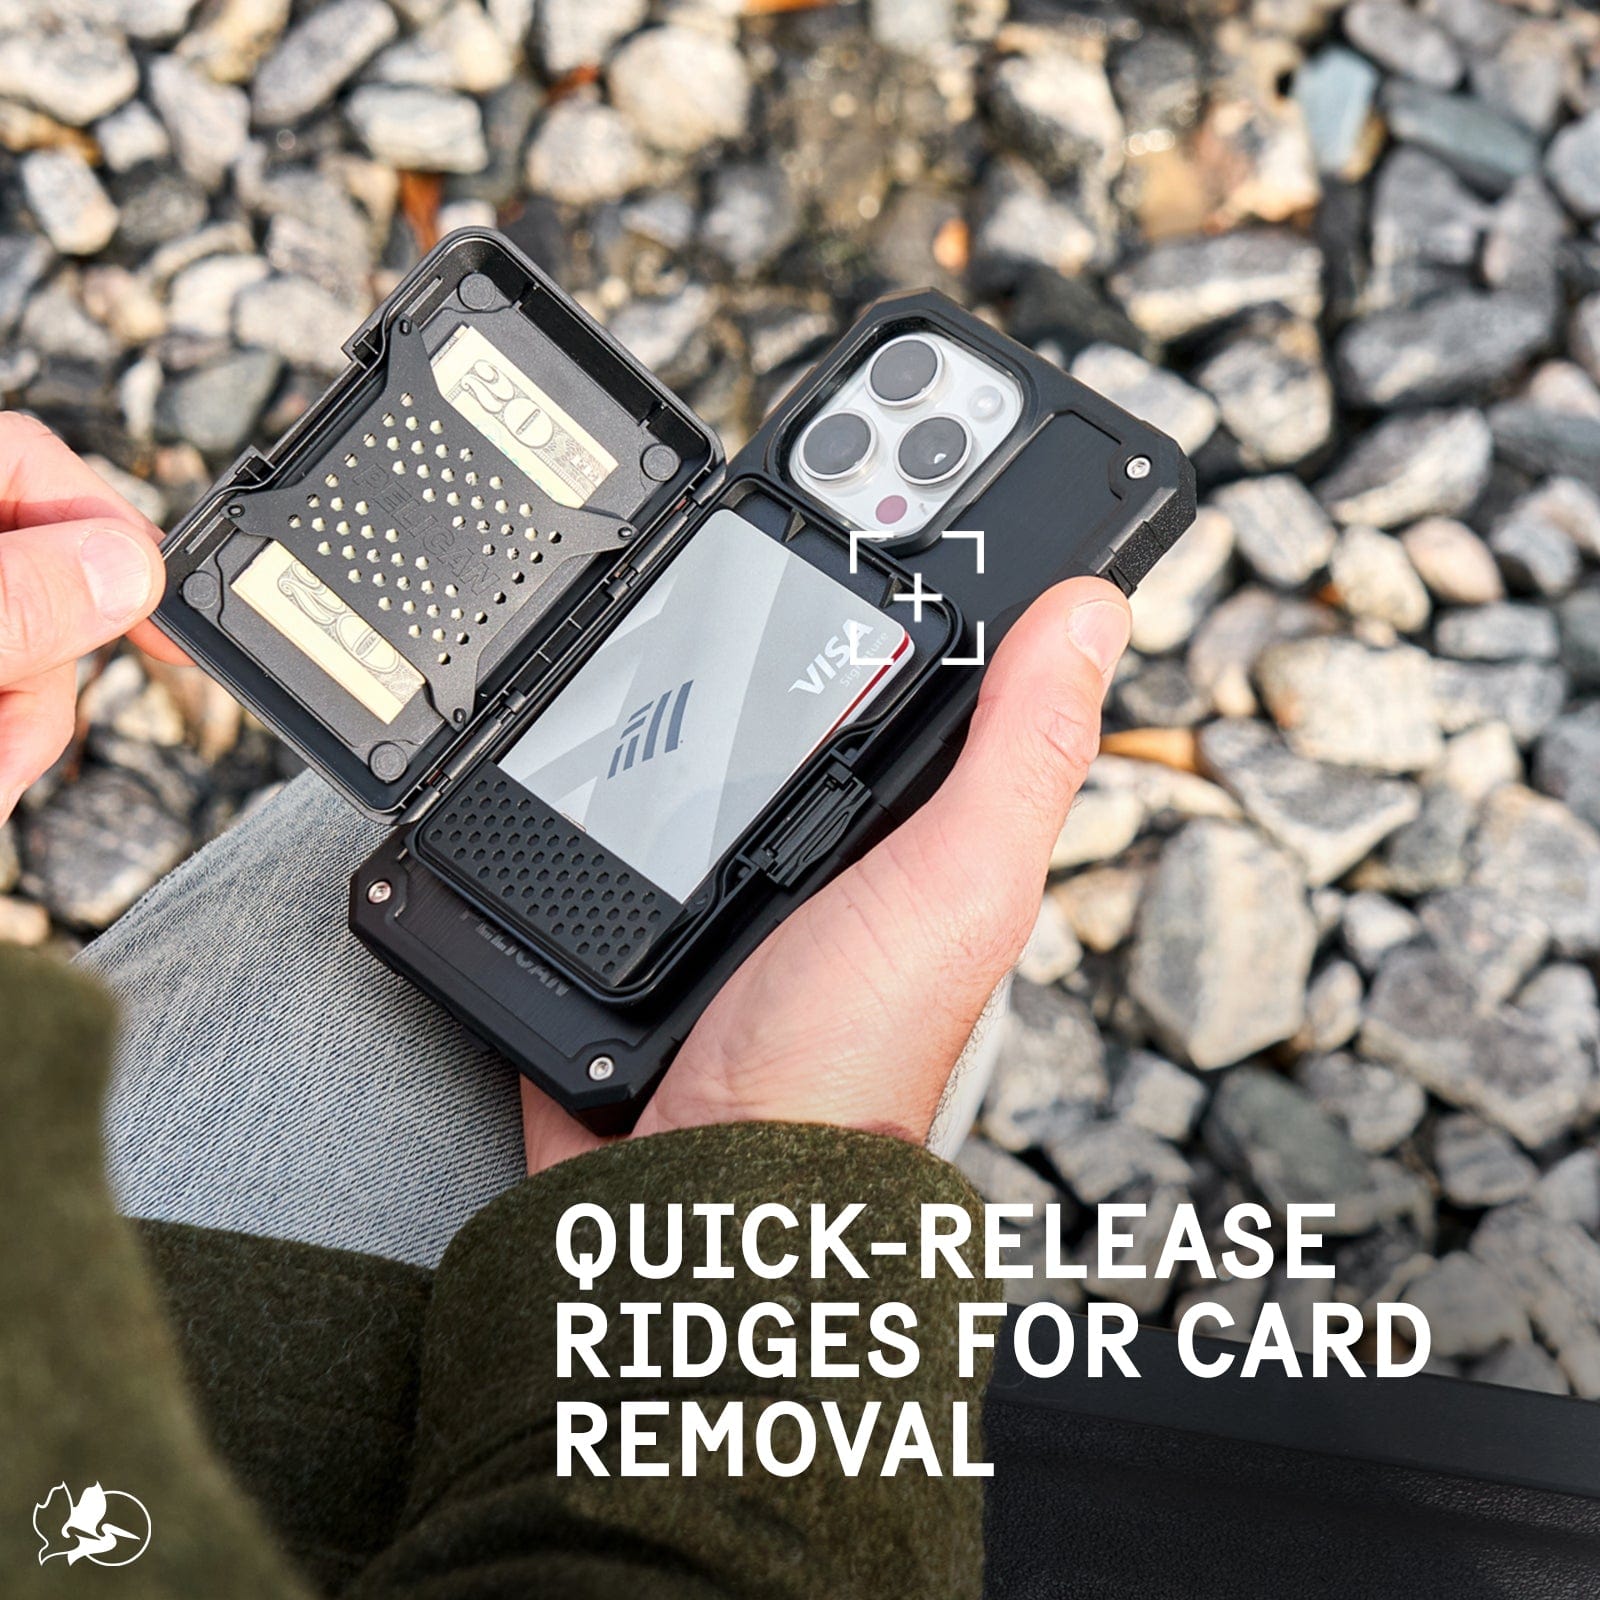 QUICK-RELEASE RIDGES FOR CARD REMOVAL.